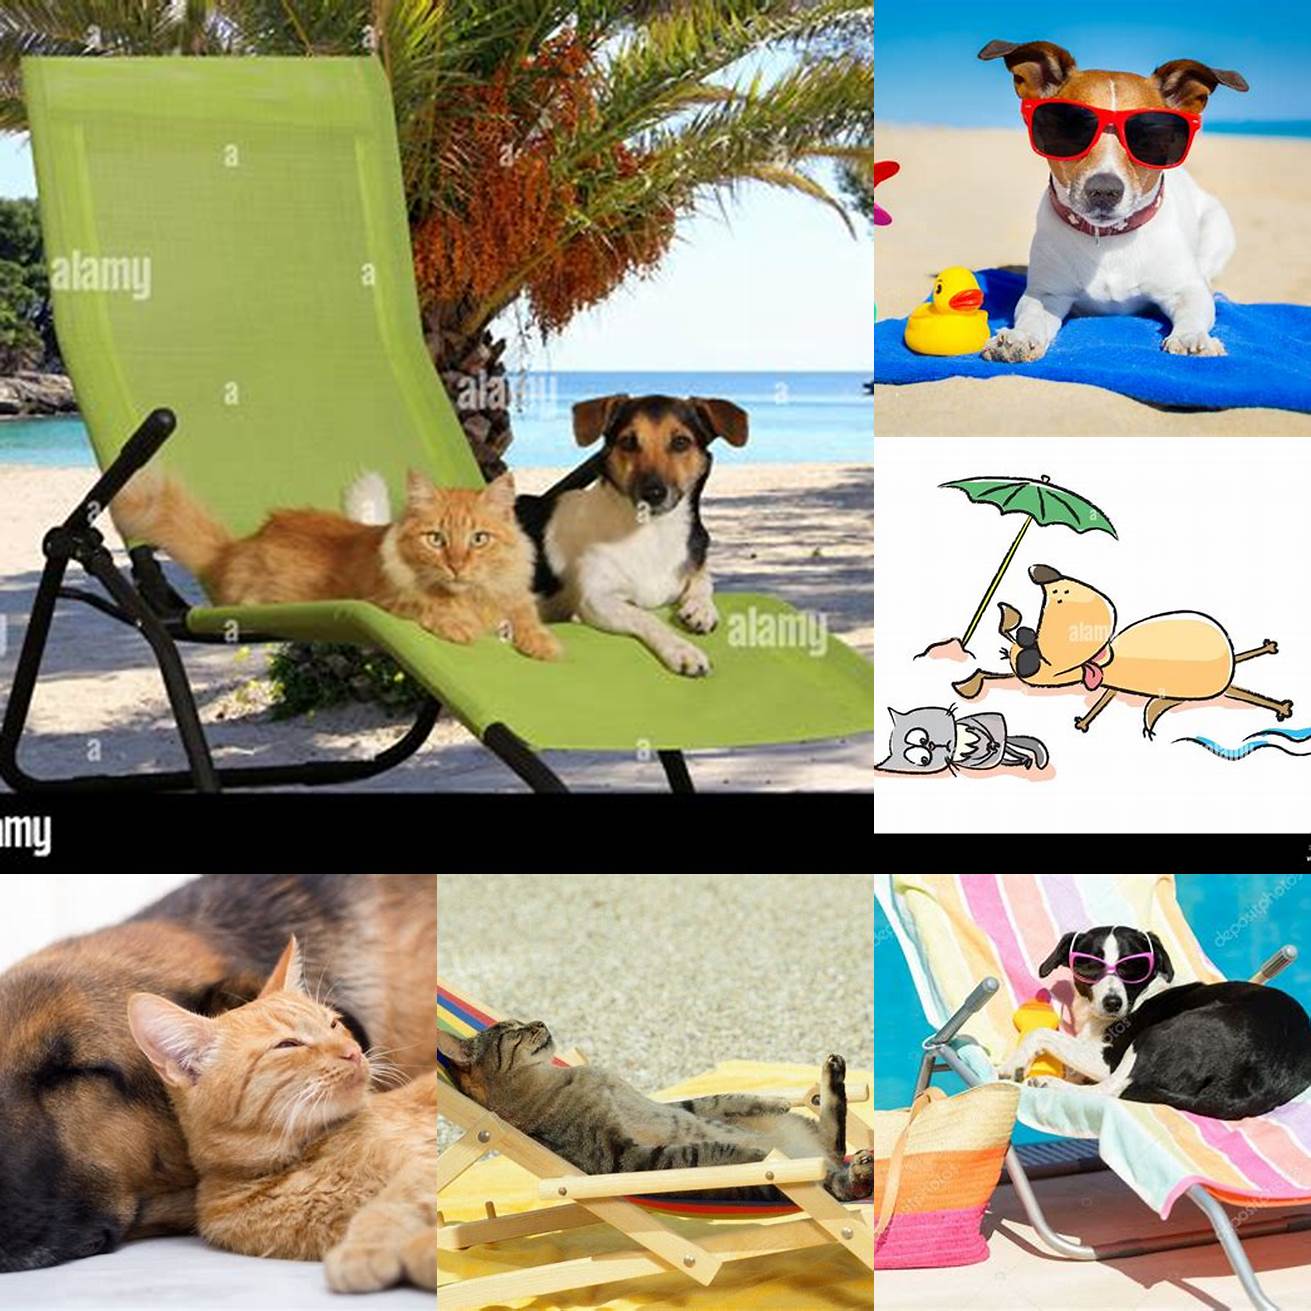 Image Idea 6 A Dog and a Cat Sunbathing Together